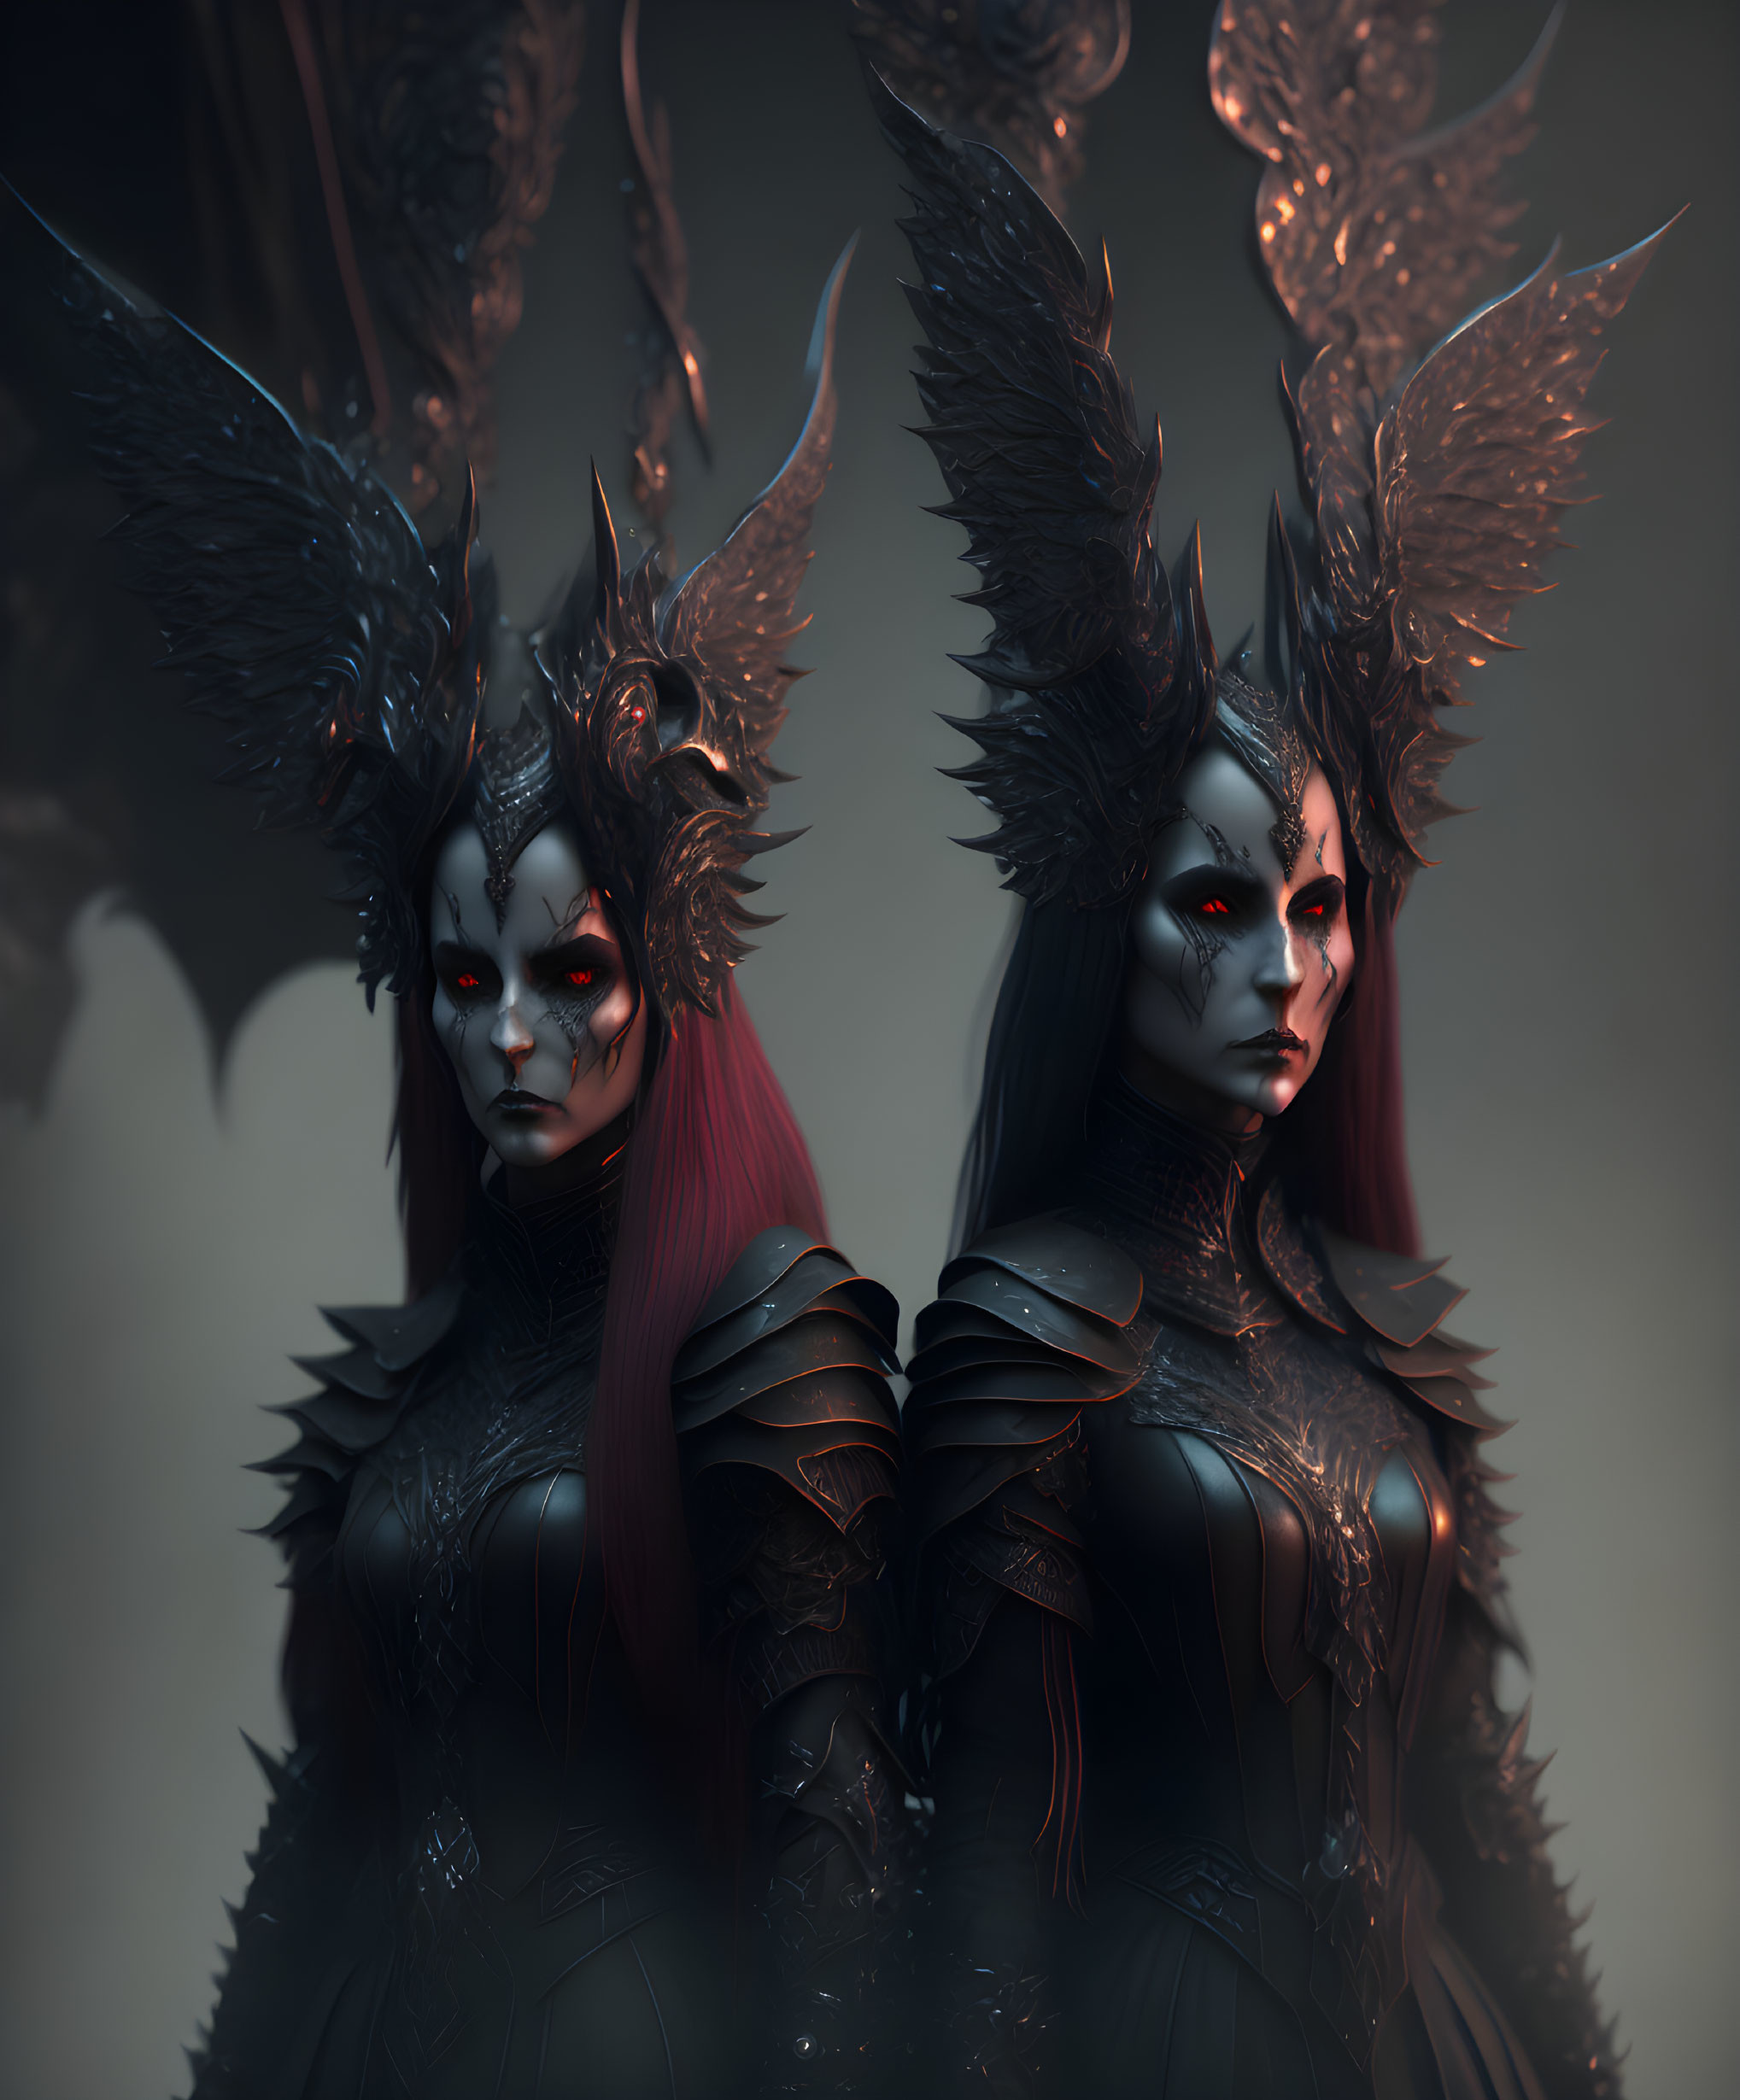 Dark armored female figures with horned headdresses in shadowed setting